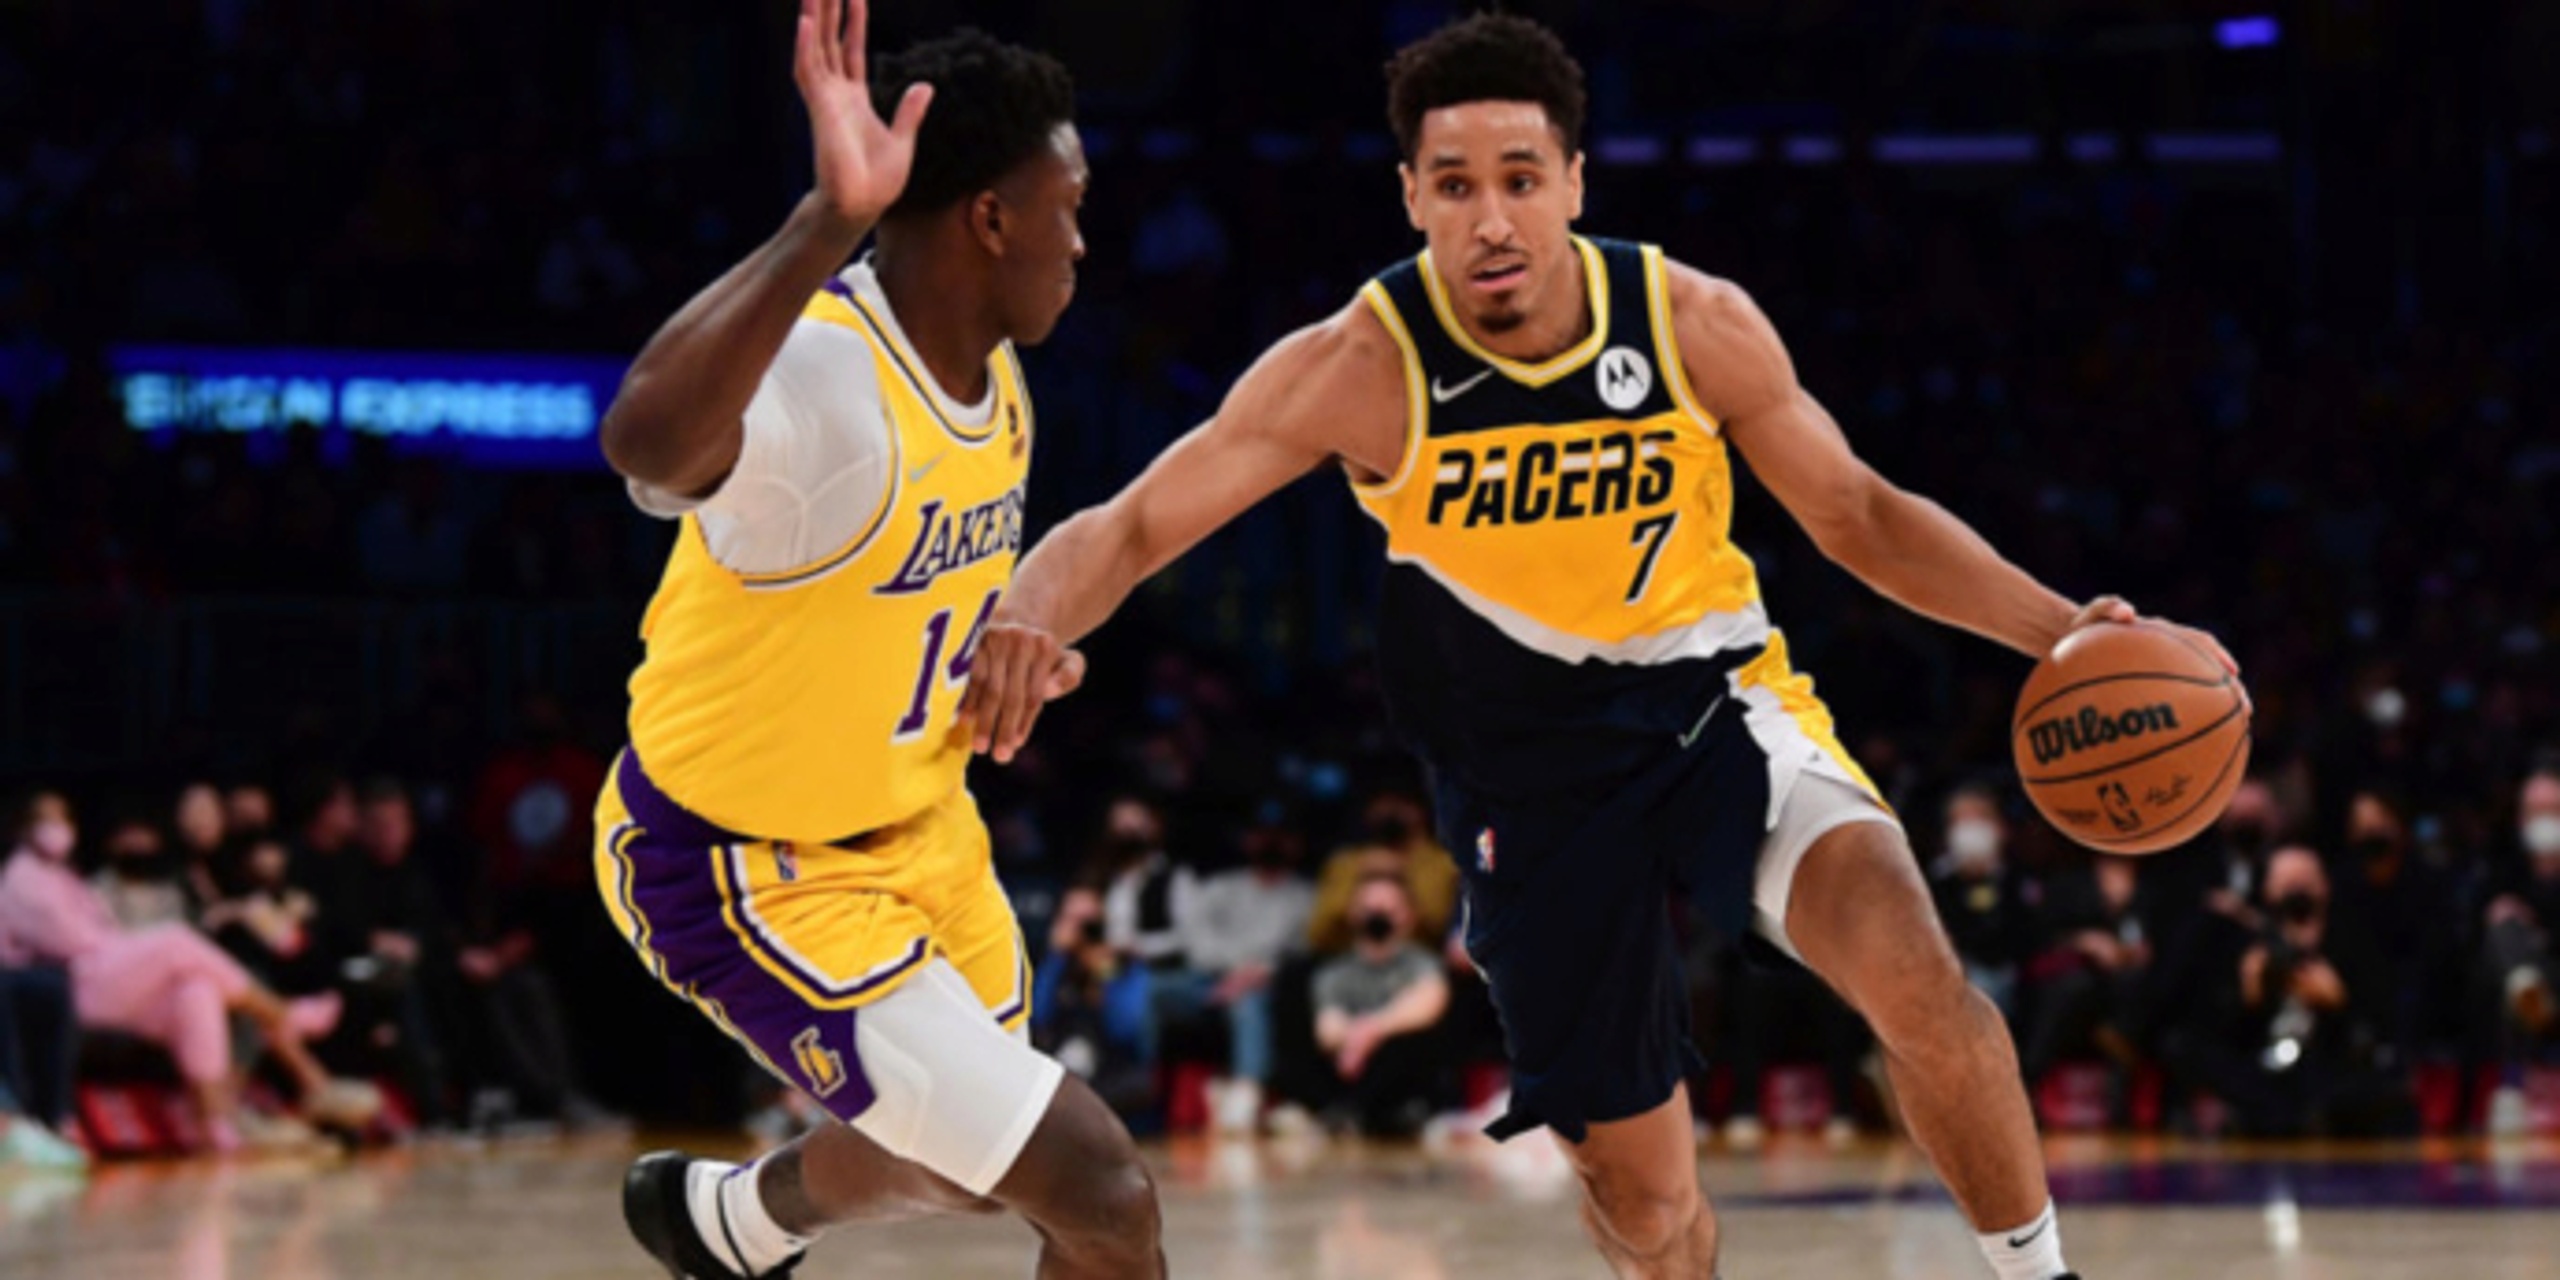 Pacers could move Brogdon in offseason, giving keys to Haliburton